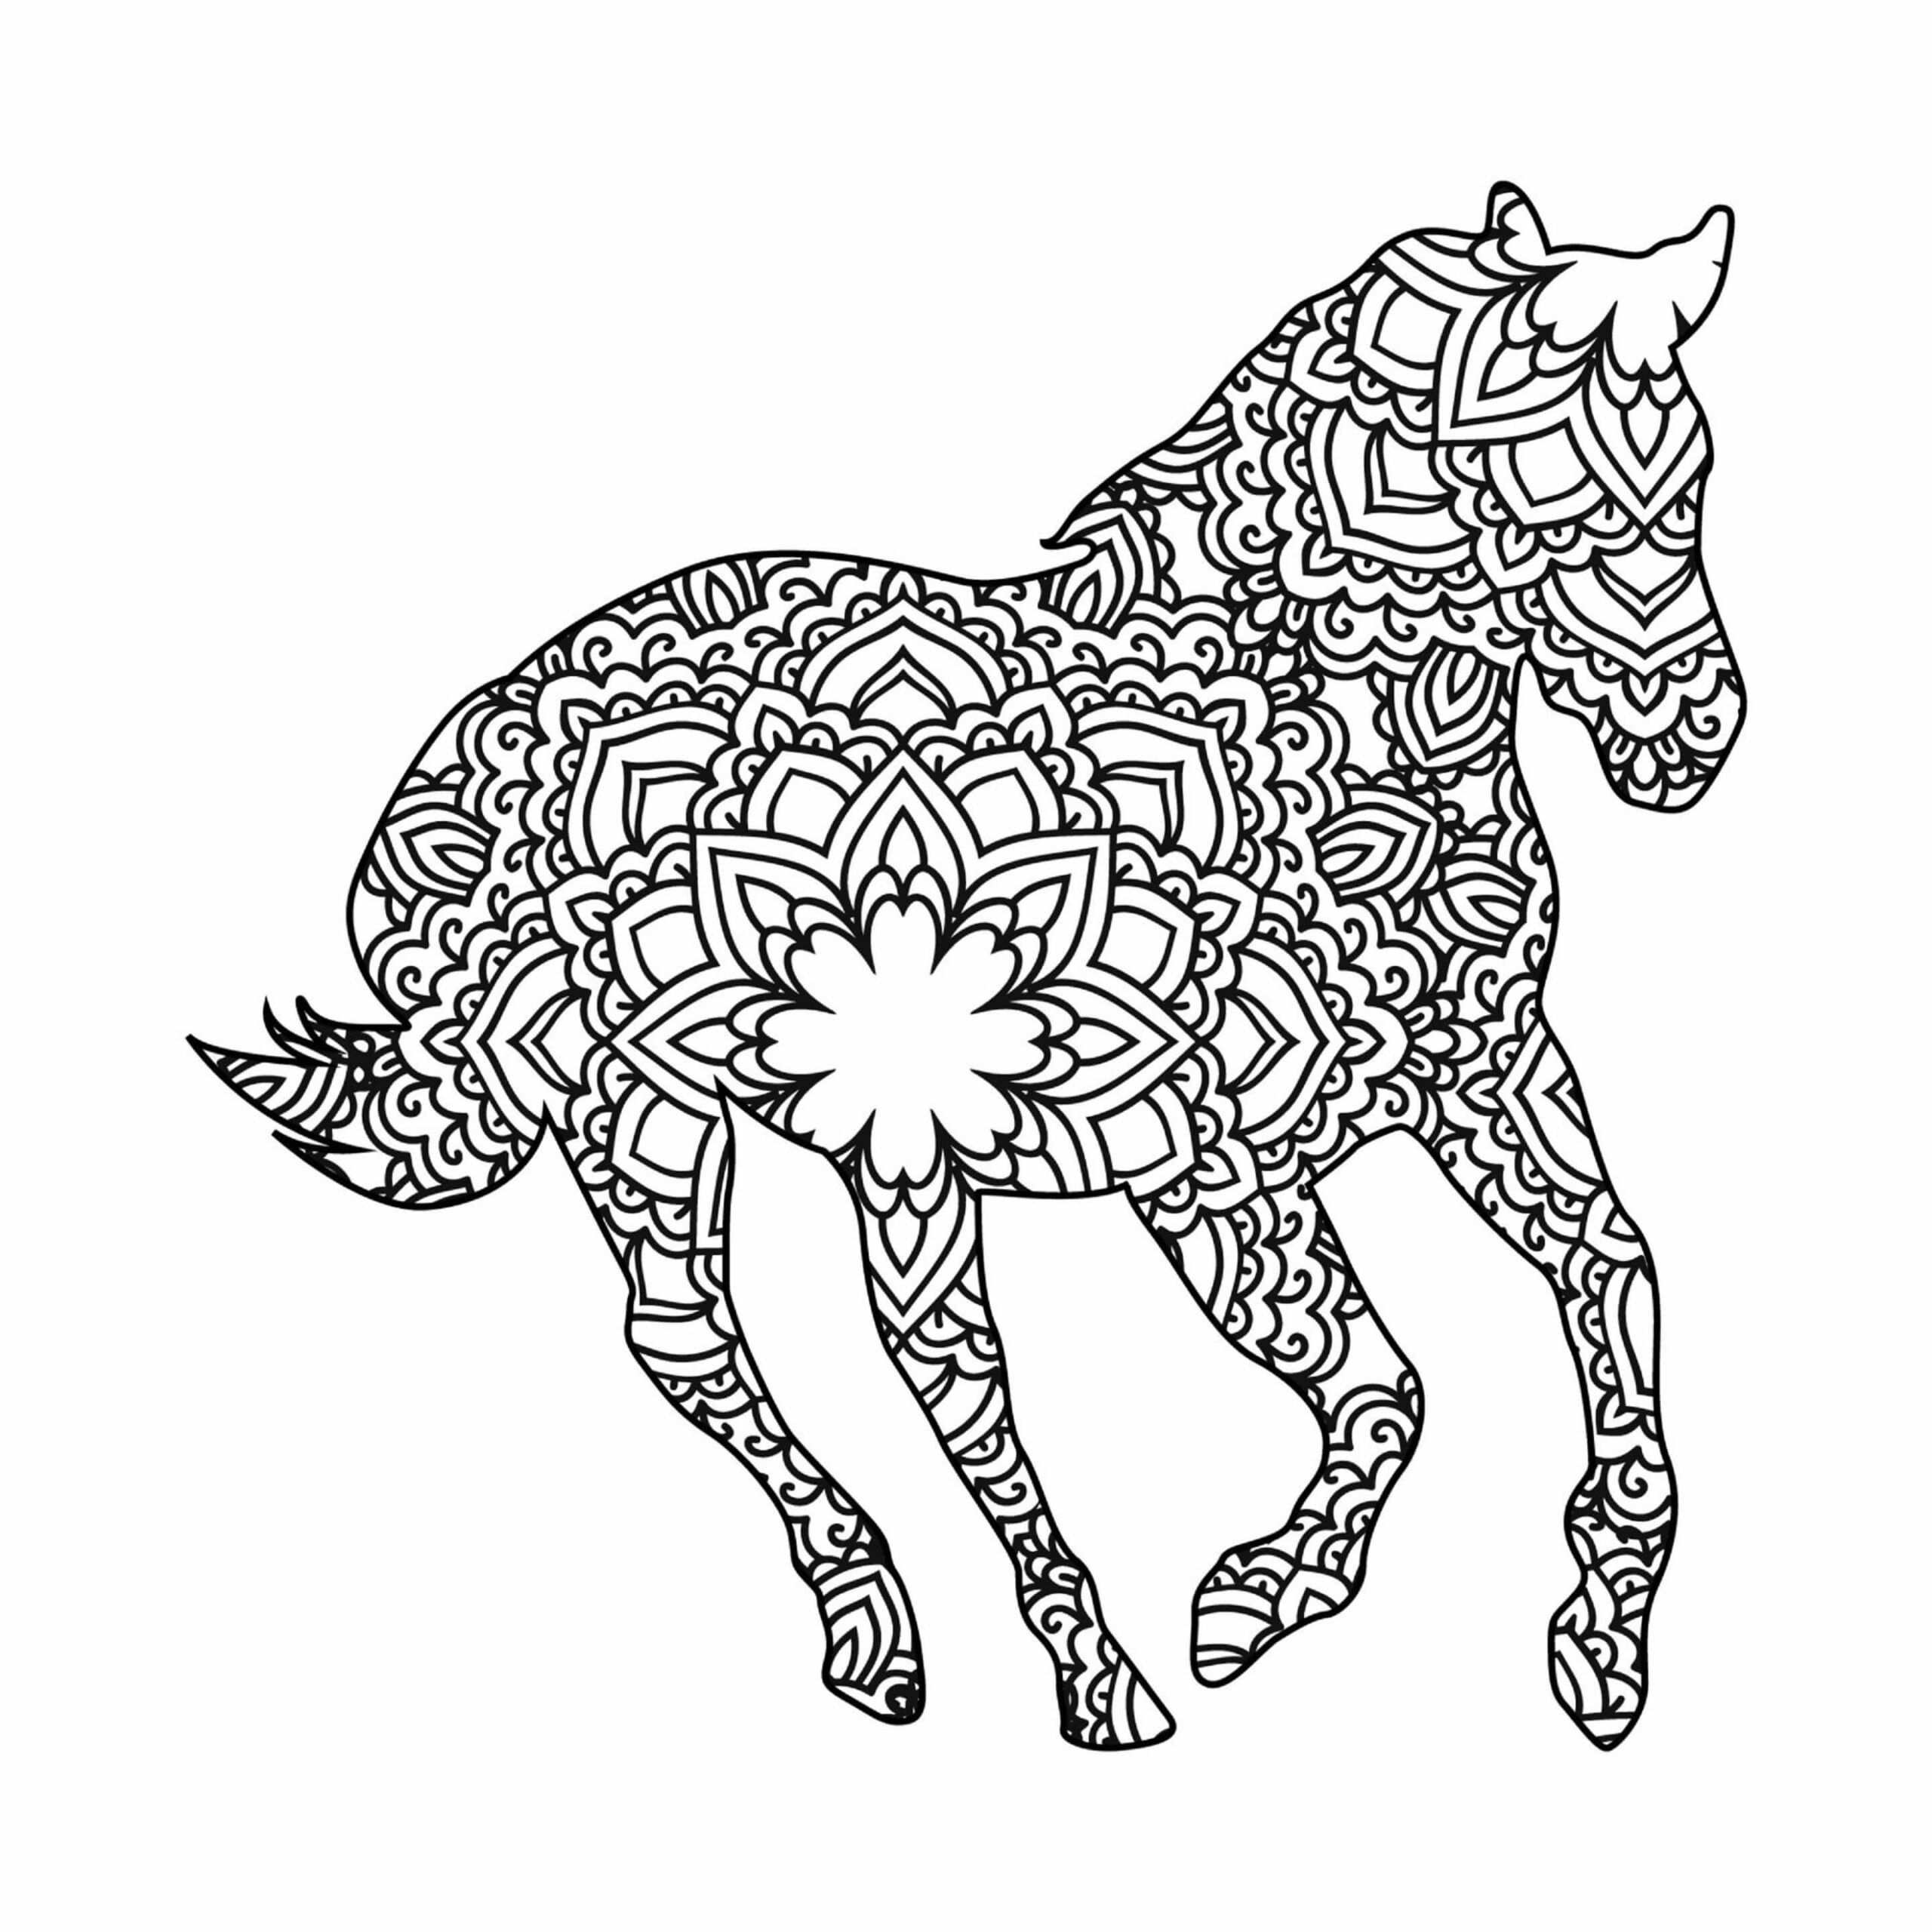 Good Horse Mandala coloring page - Download, Print or Color Online for Free